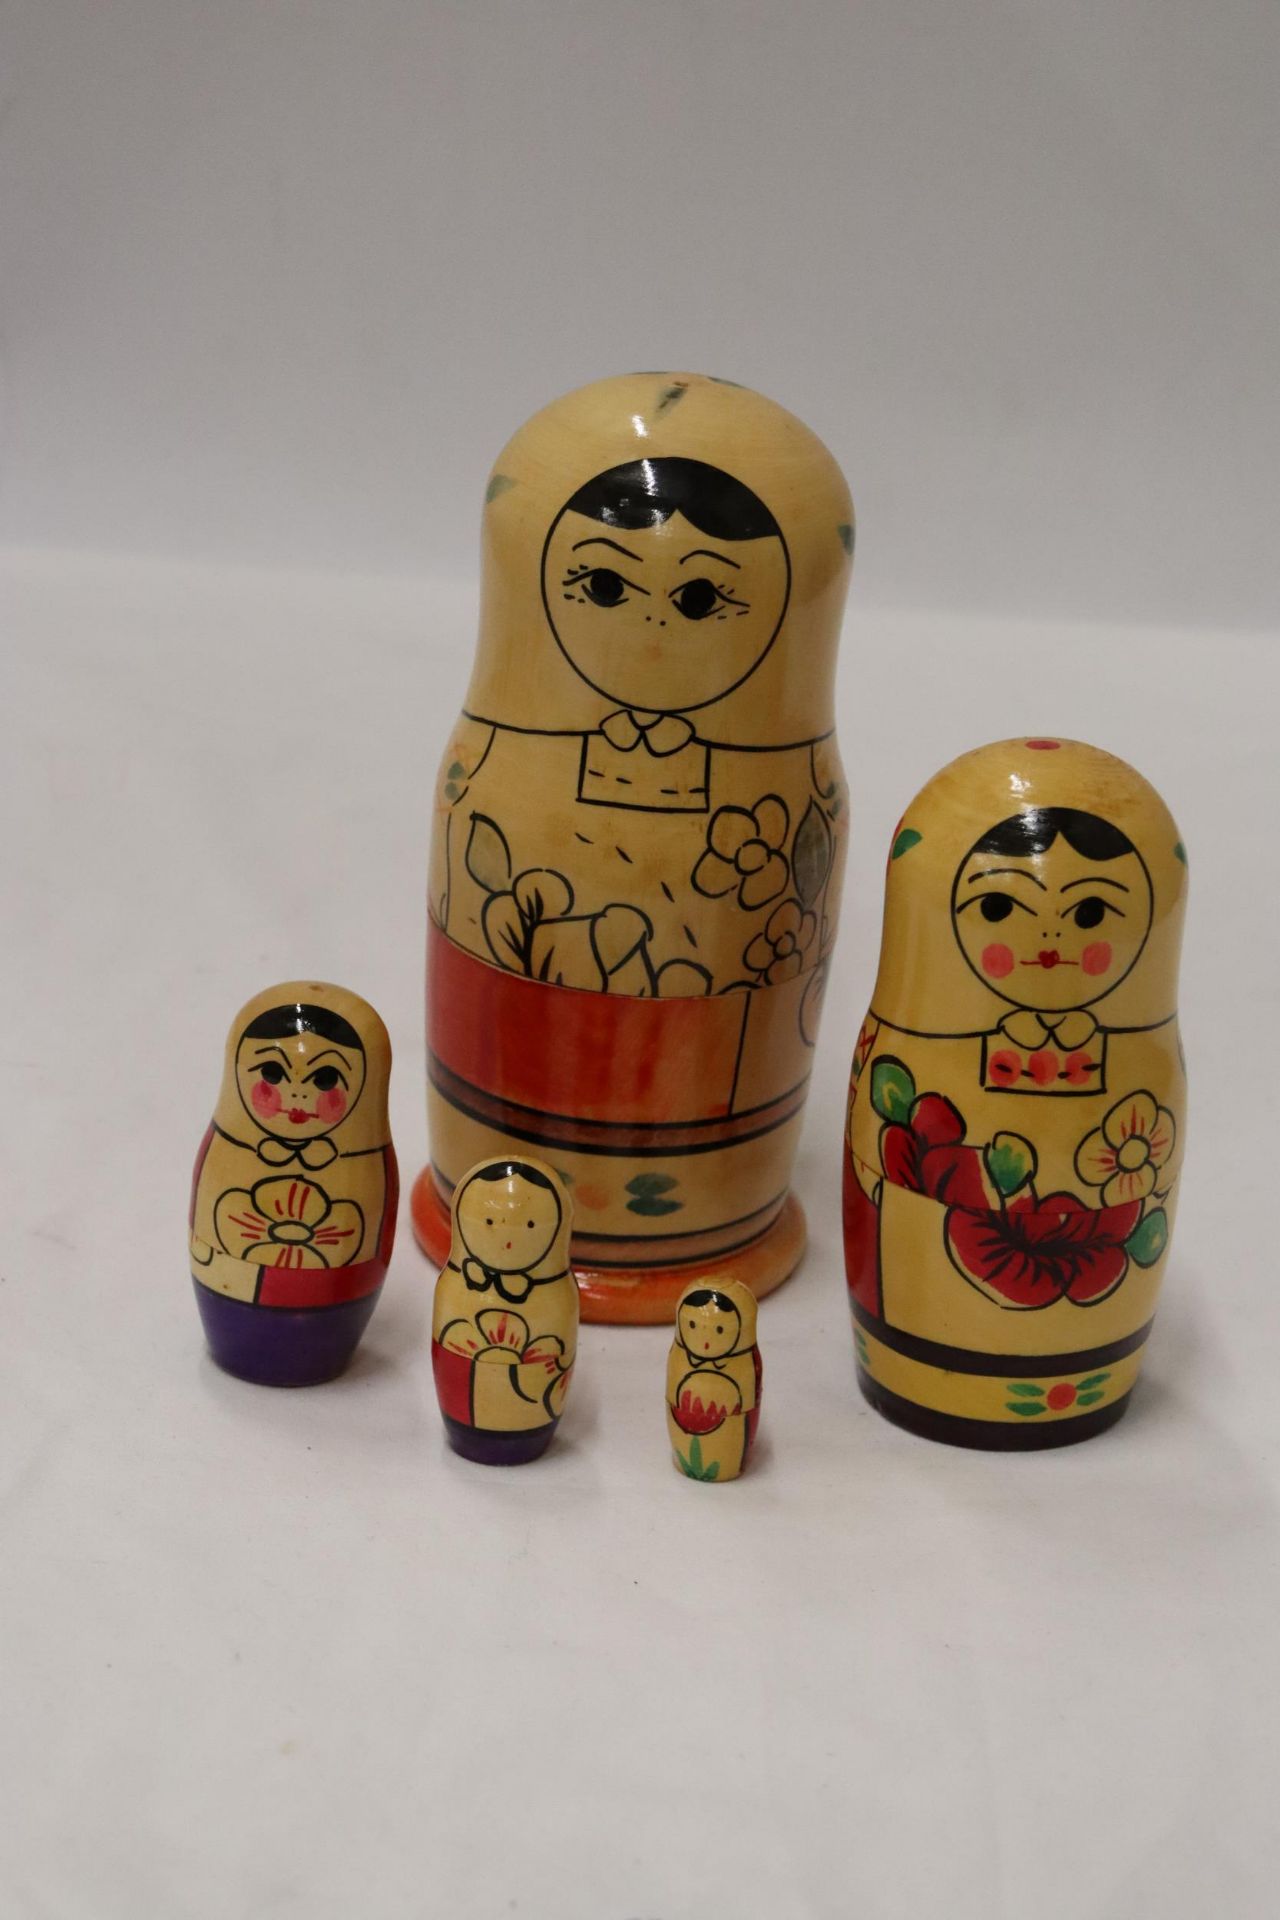 A LARGE RUSSIAN NESTING DOLL